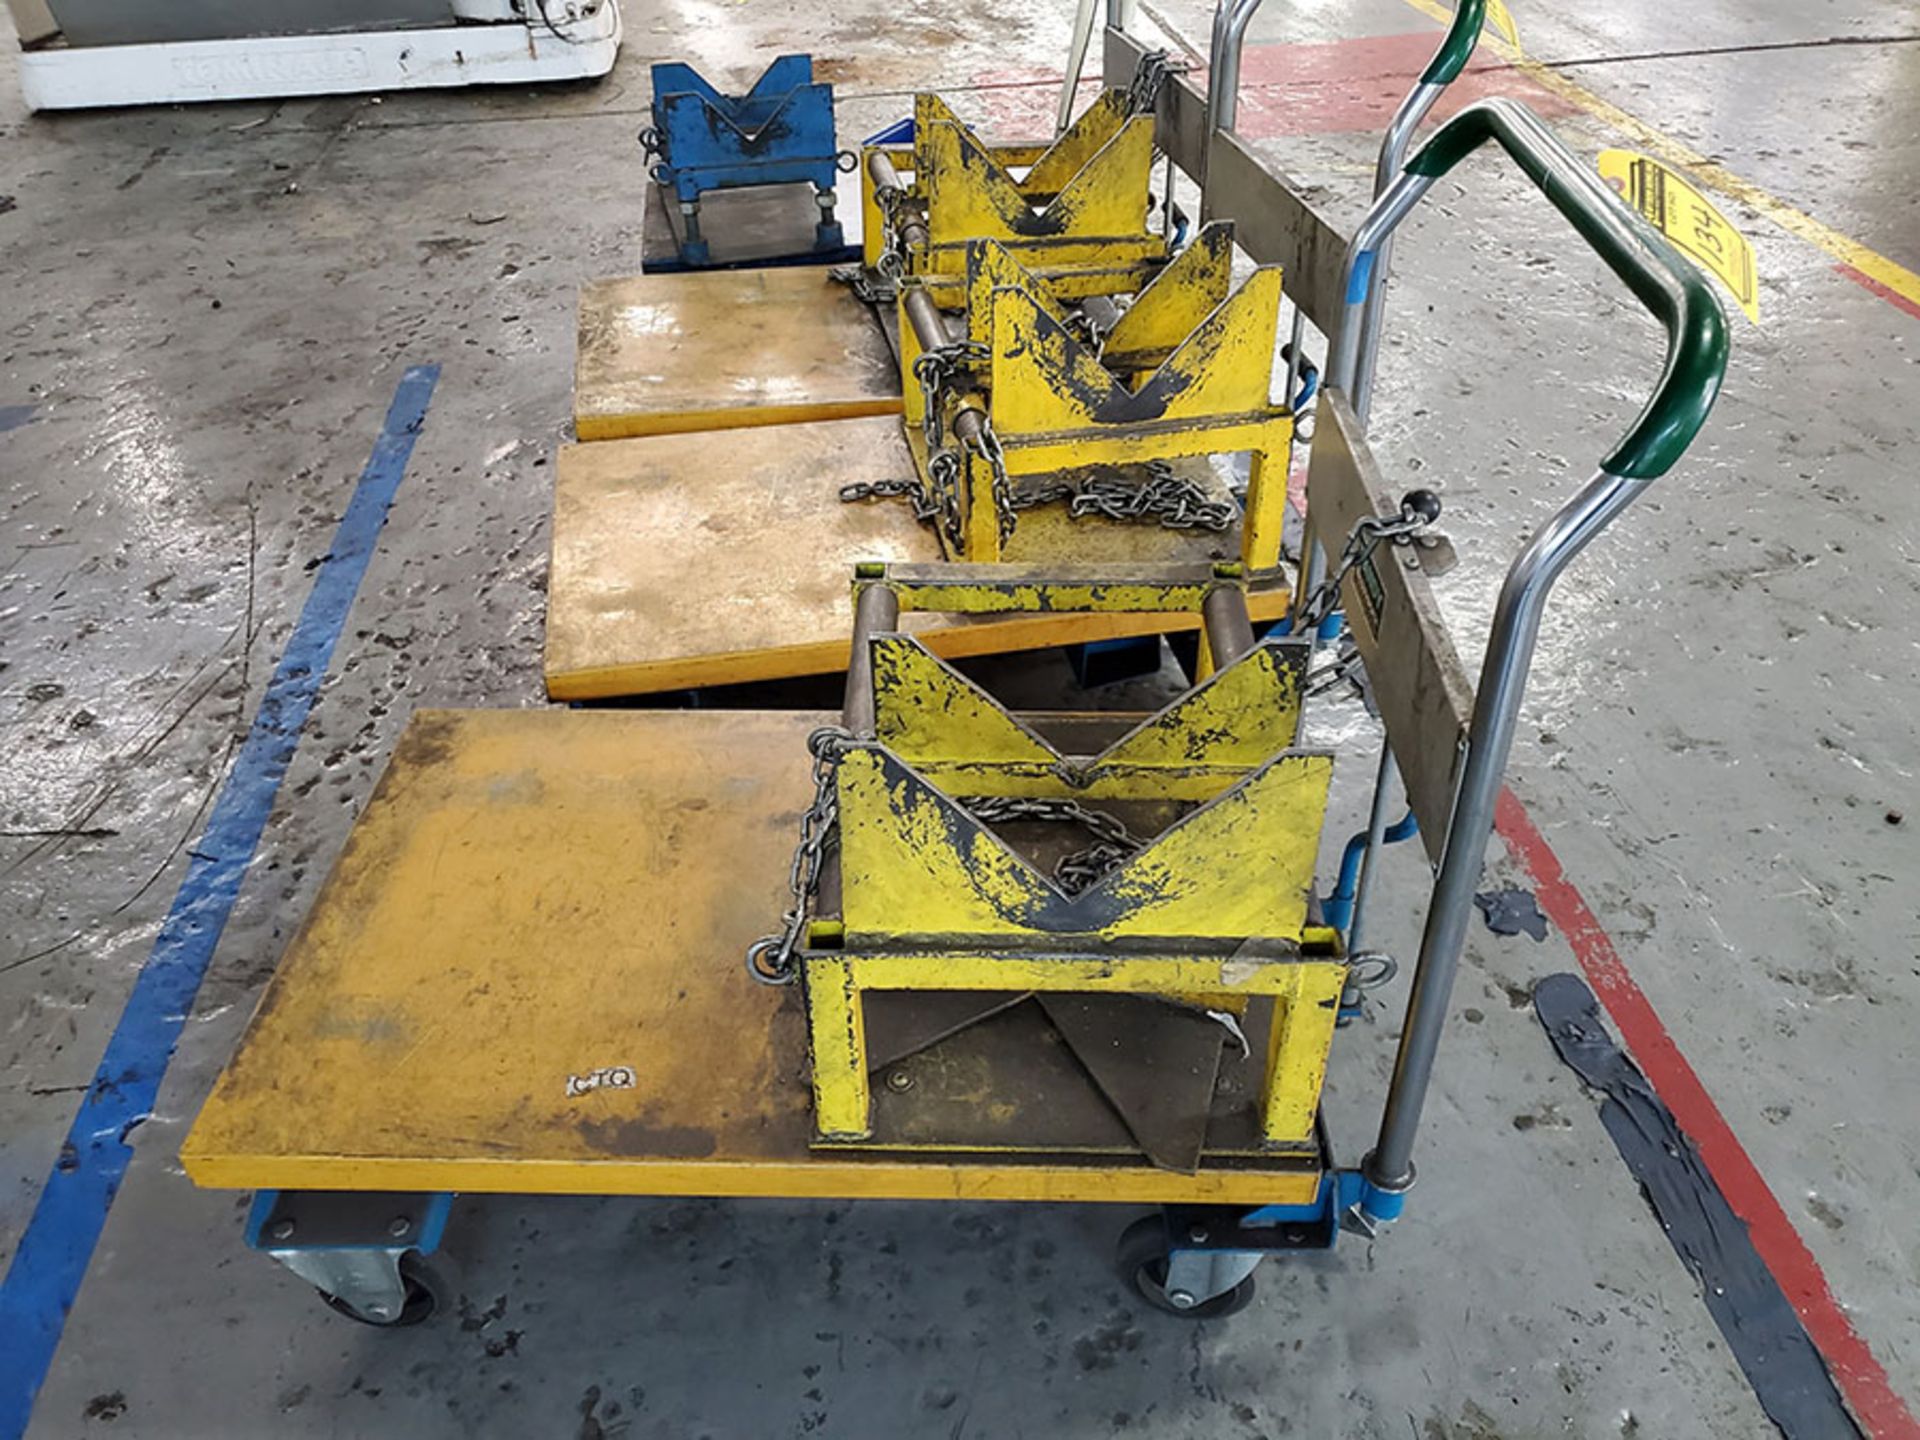 DANDY 1,100 LB. HYDRAULIC DIE LIFT CARTS WITH ADJUSTABLE SADDLE FIXTURES - Image 2 of 5